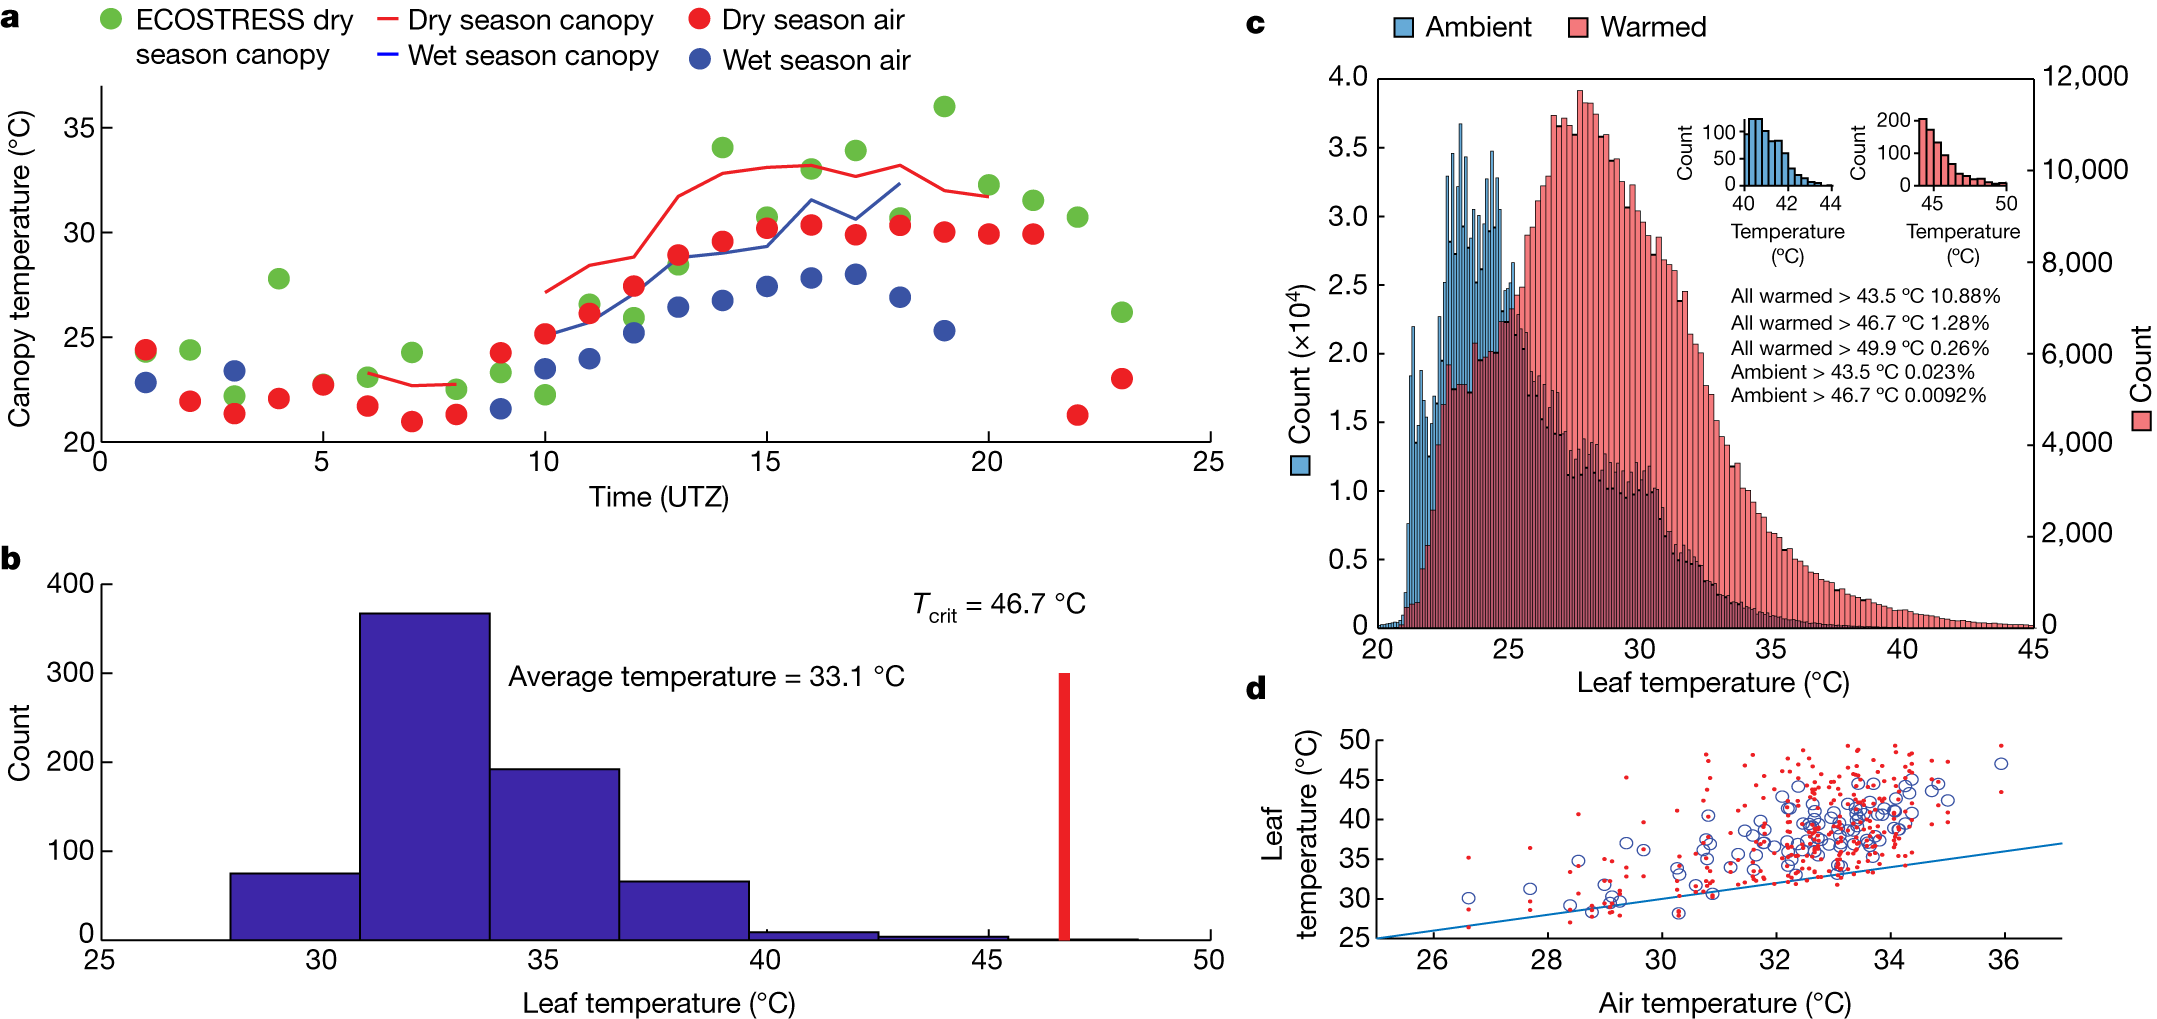 Tropical forests are approaching critical temperature thresholds